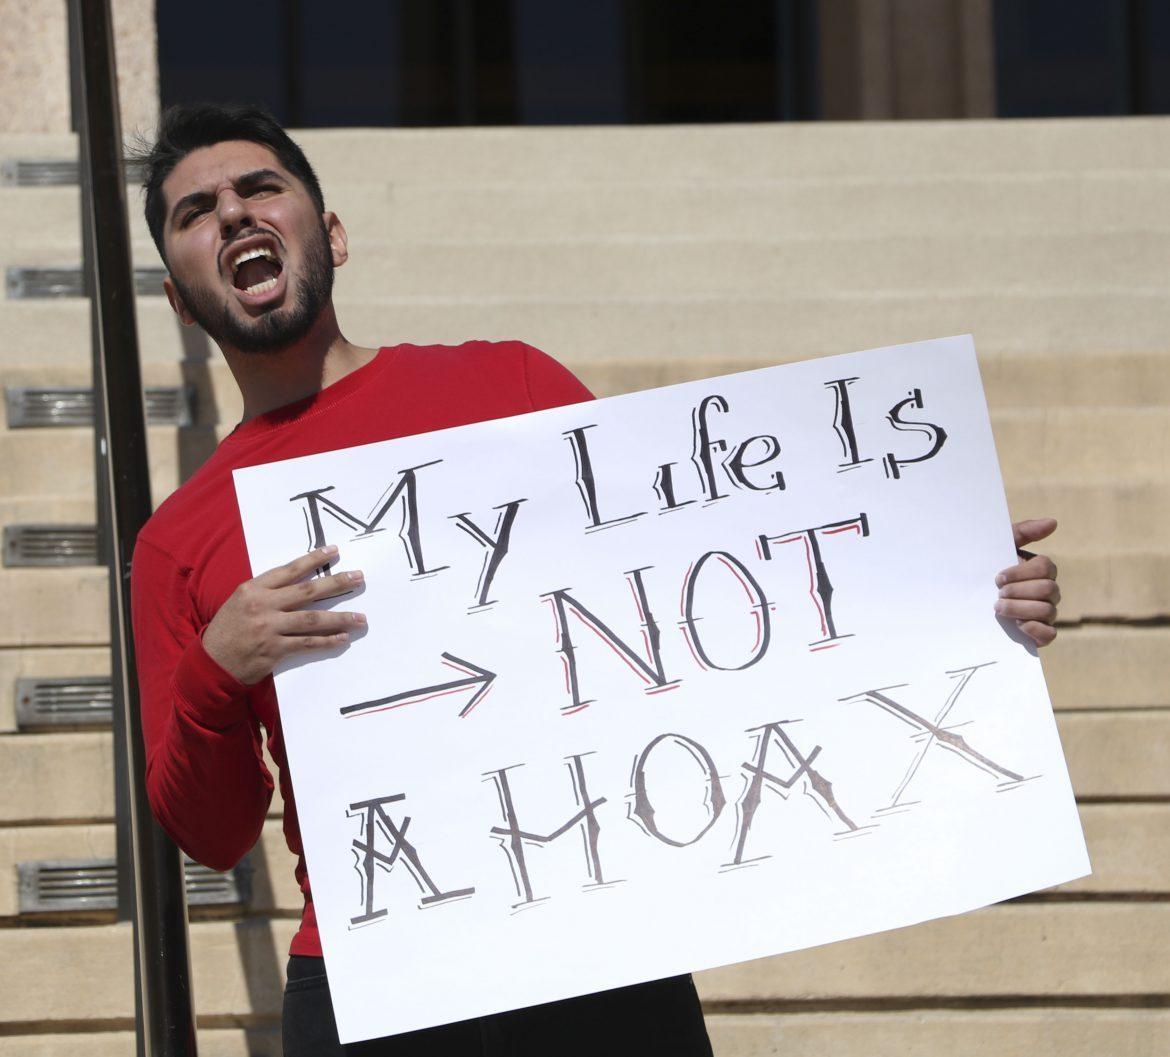 Daniel Gomez yells out a chant as he protests against the “Gun Hoax” and how the school police handled the situation in front of the Oviatt Library. Photo credit: Daniel Valencia